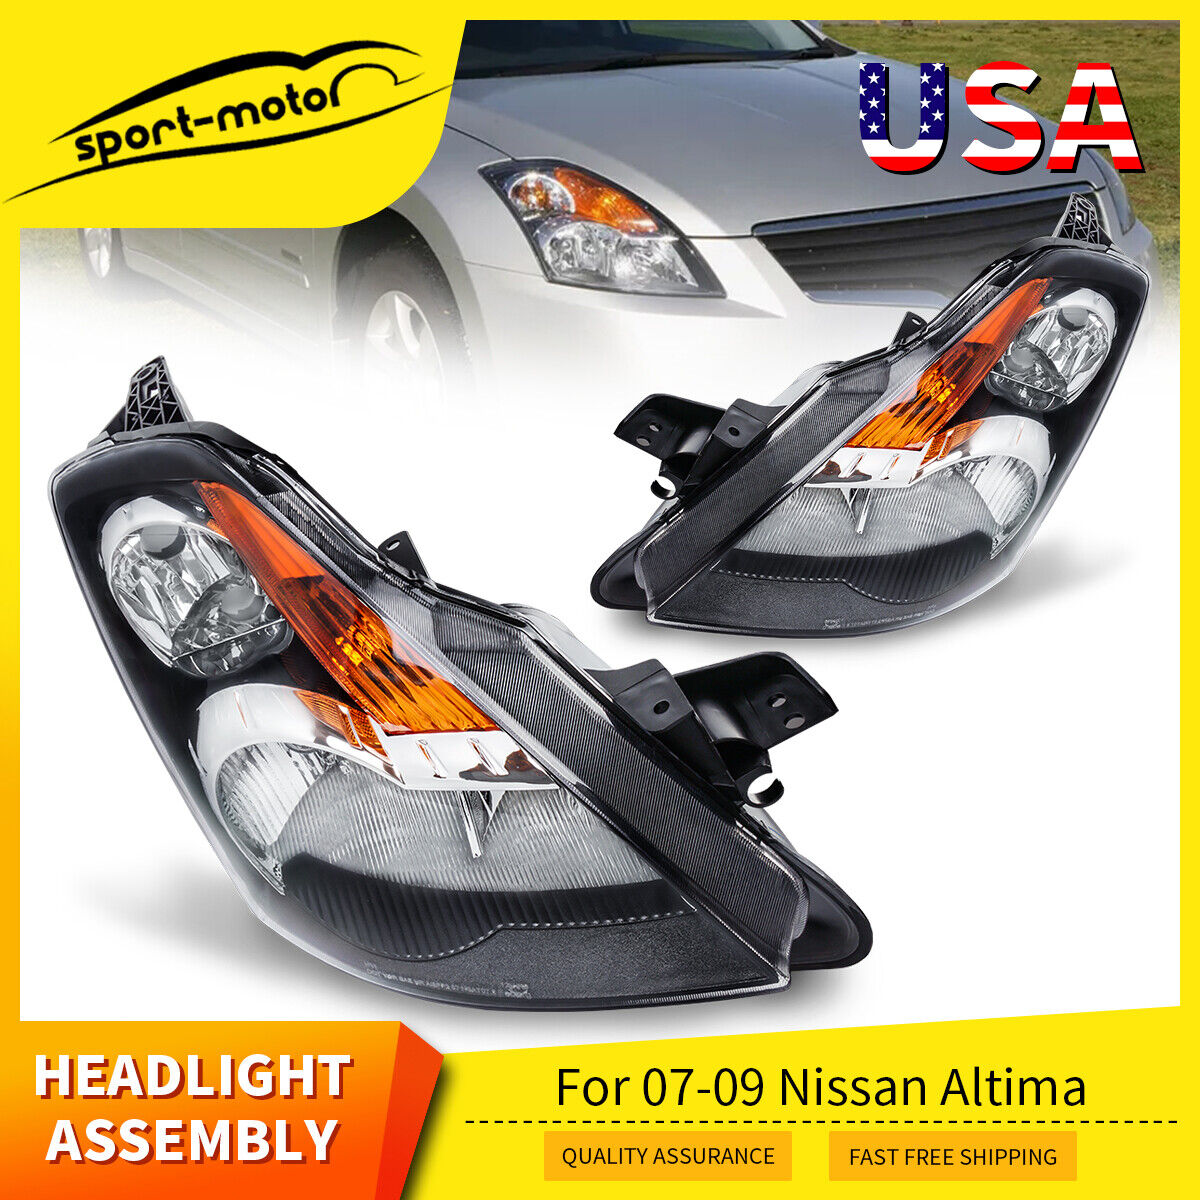 Factory Style Replacement Headlights For 2007 2008 2009 Nissan Altima Black Set